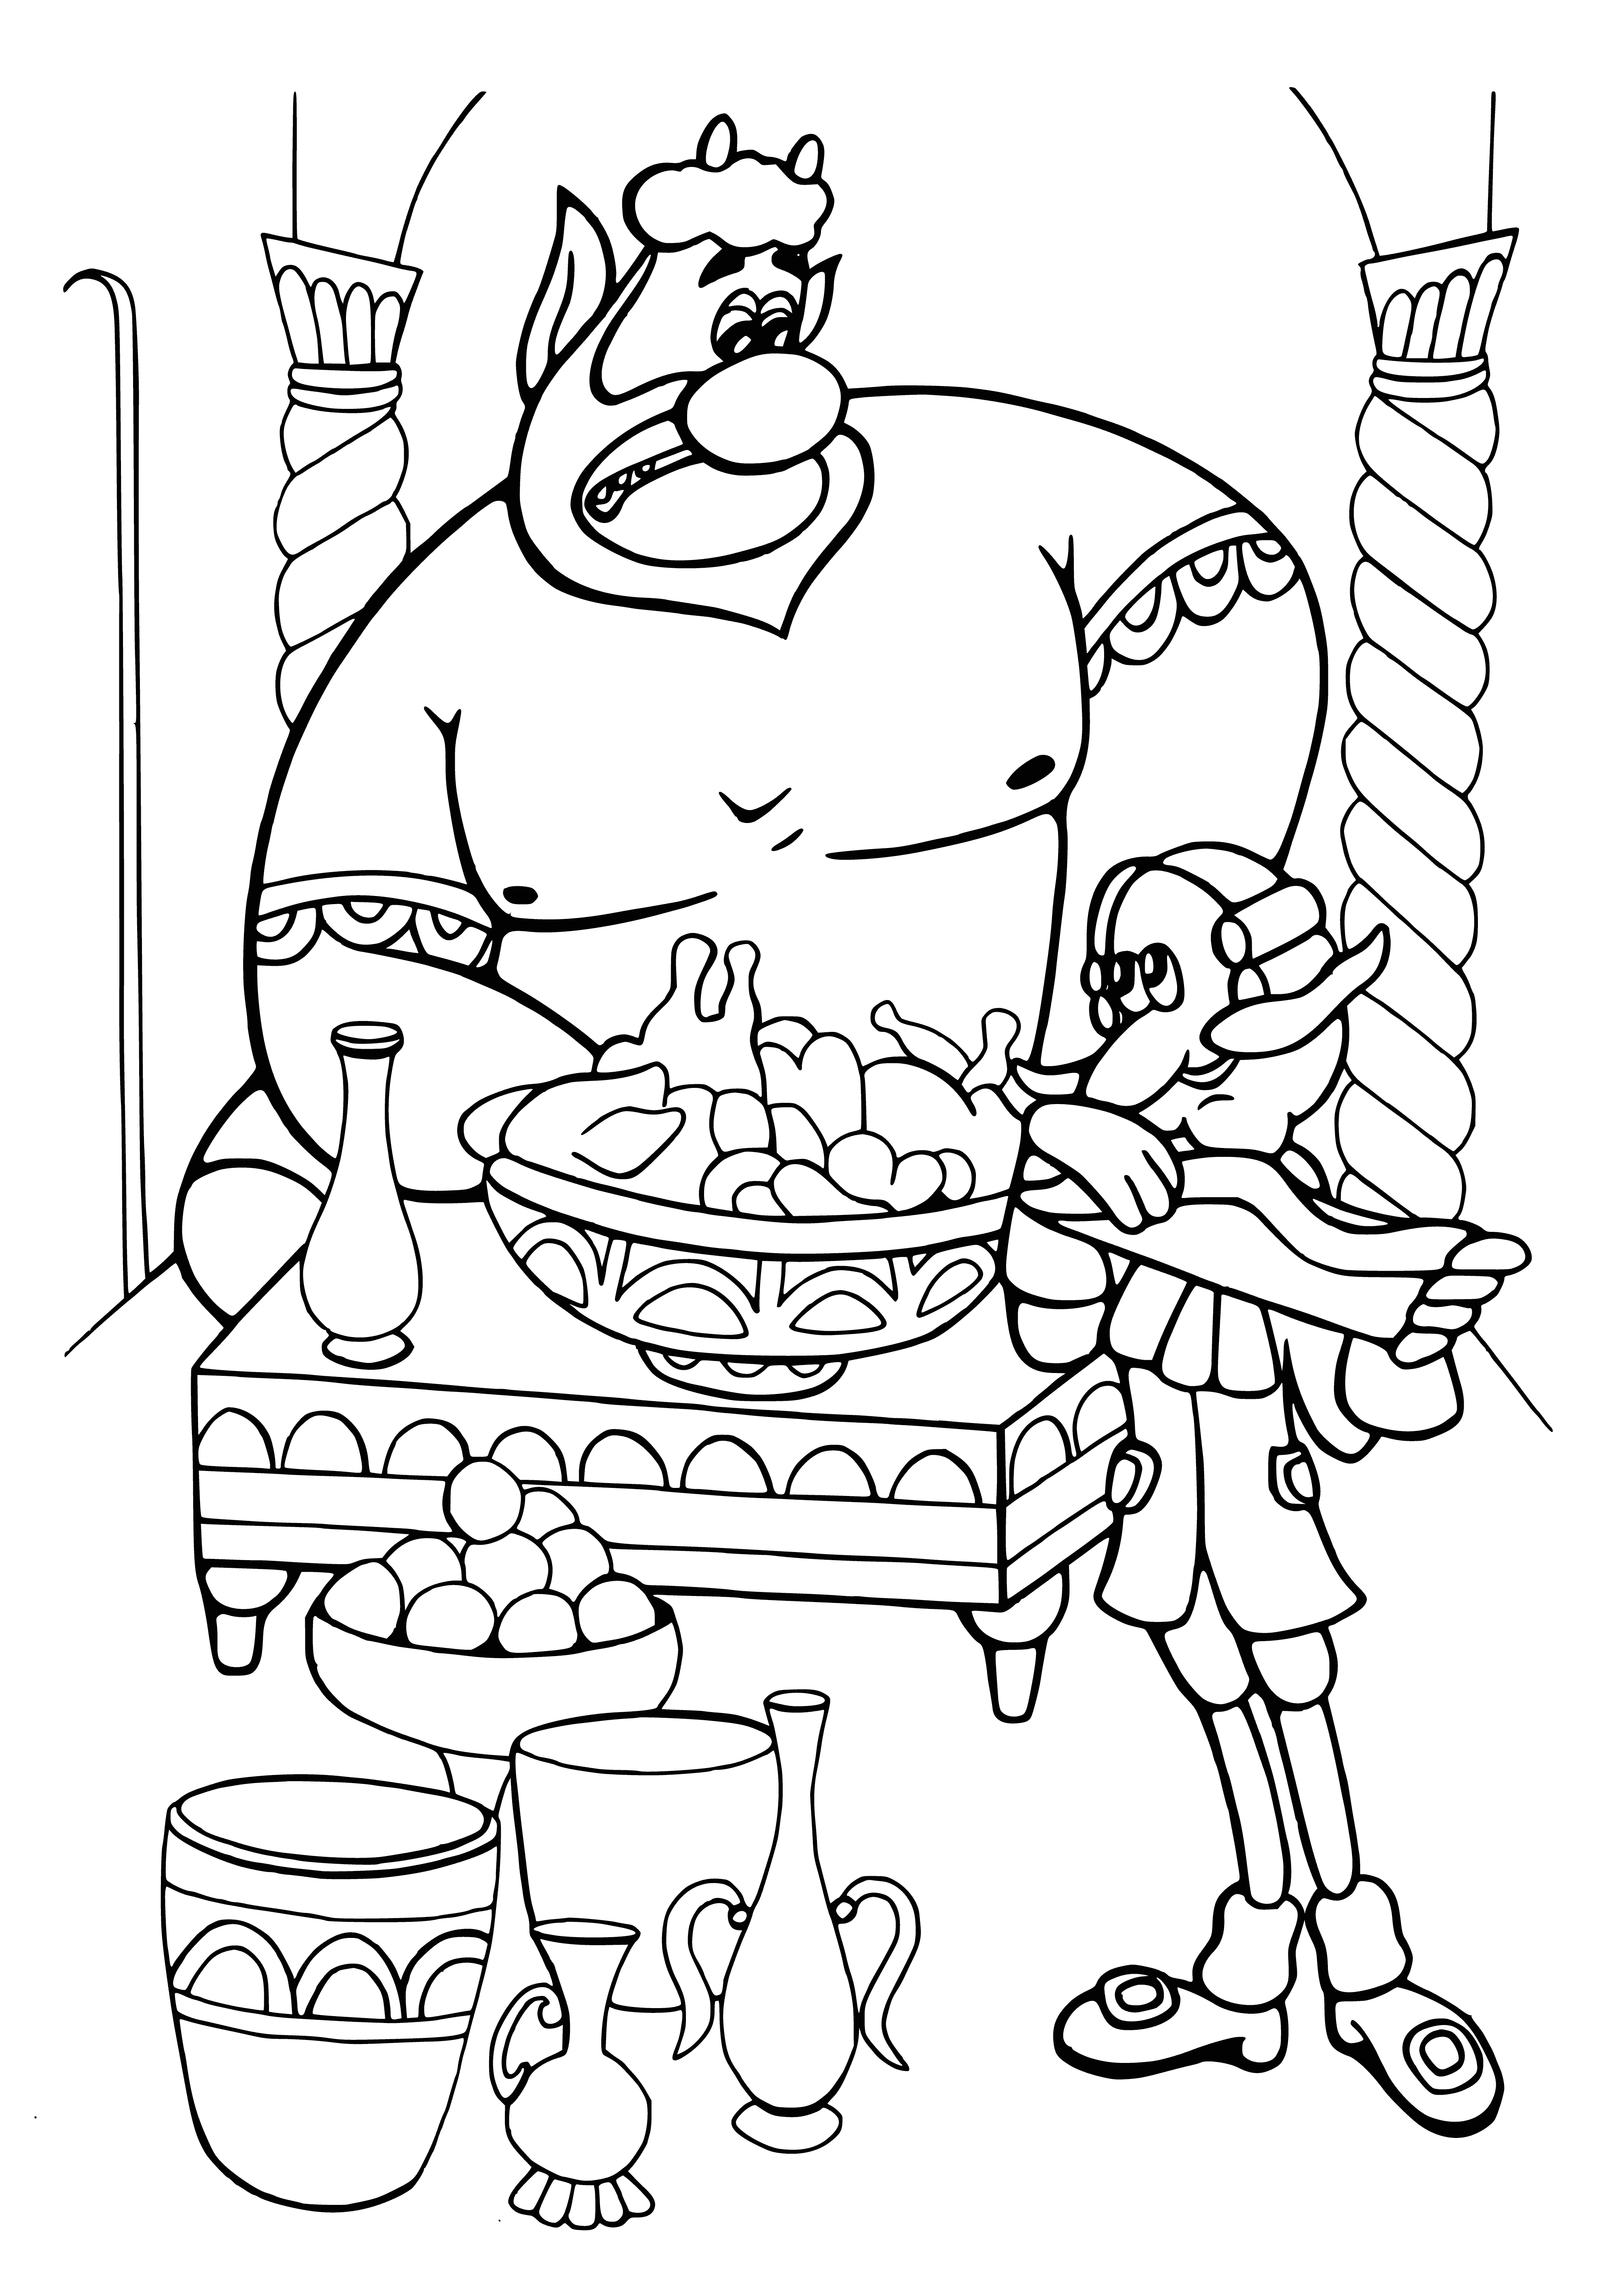 coloring page: Man in red coat and blue hat seated at table, green liquid in front. Woman in reddish dress smiling at him behind.